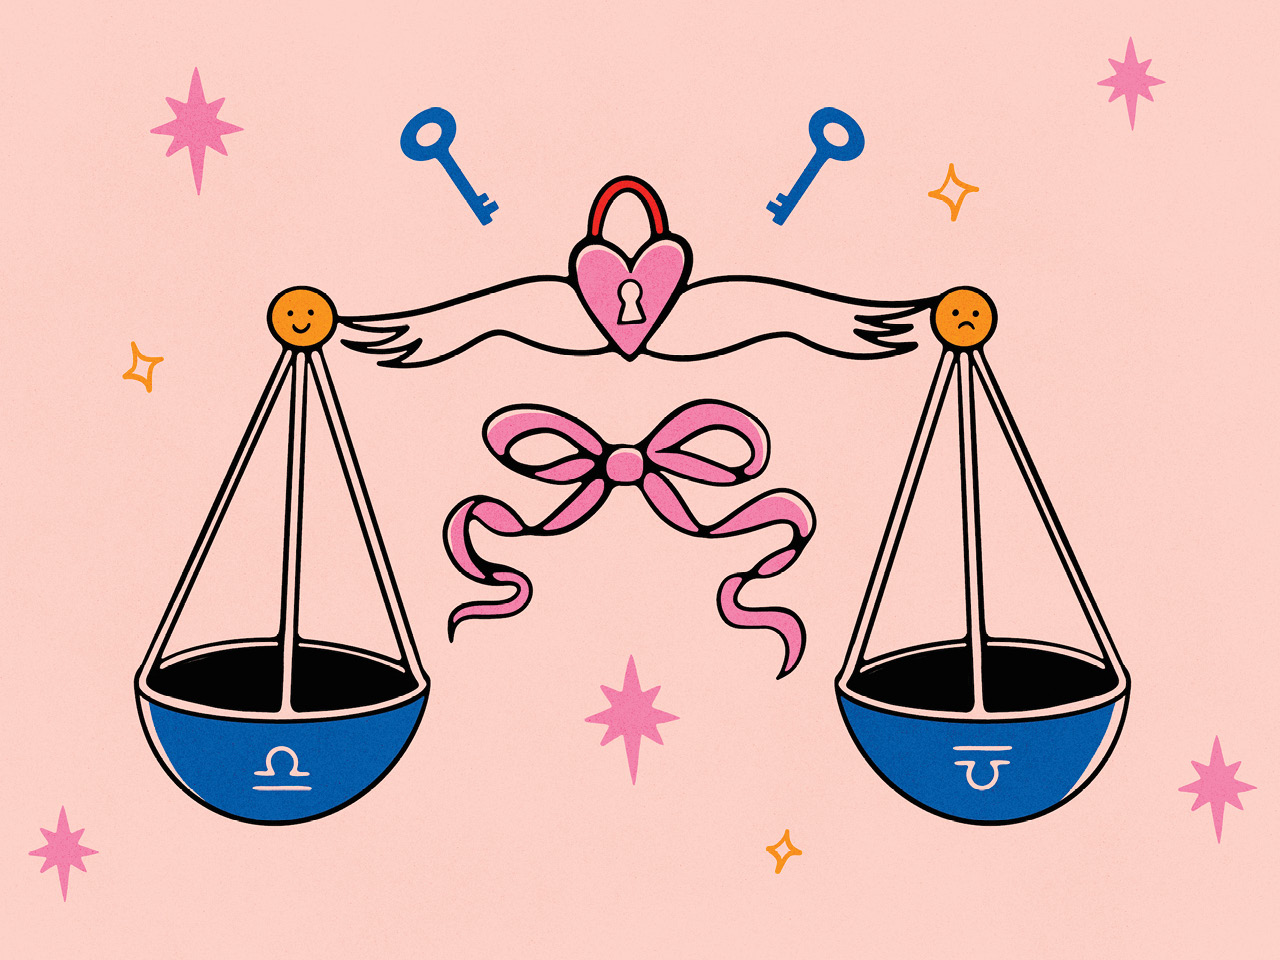 An illustration of balance scales. each bowl has the symbol for Libra on it.